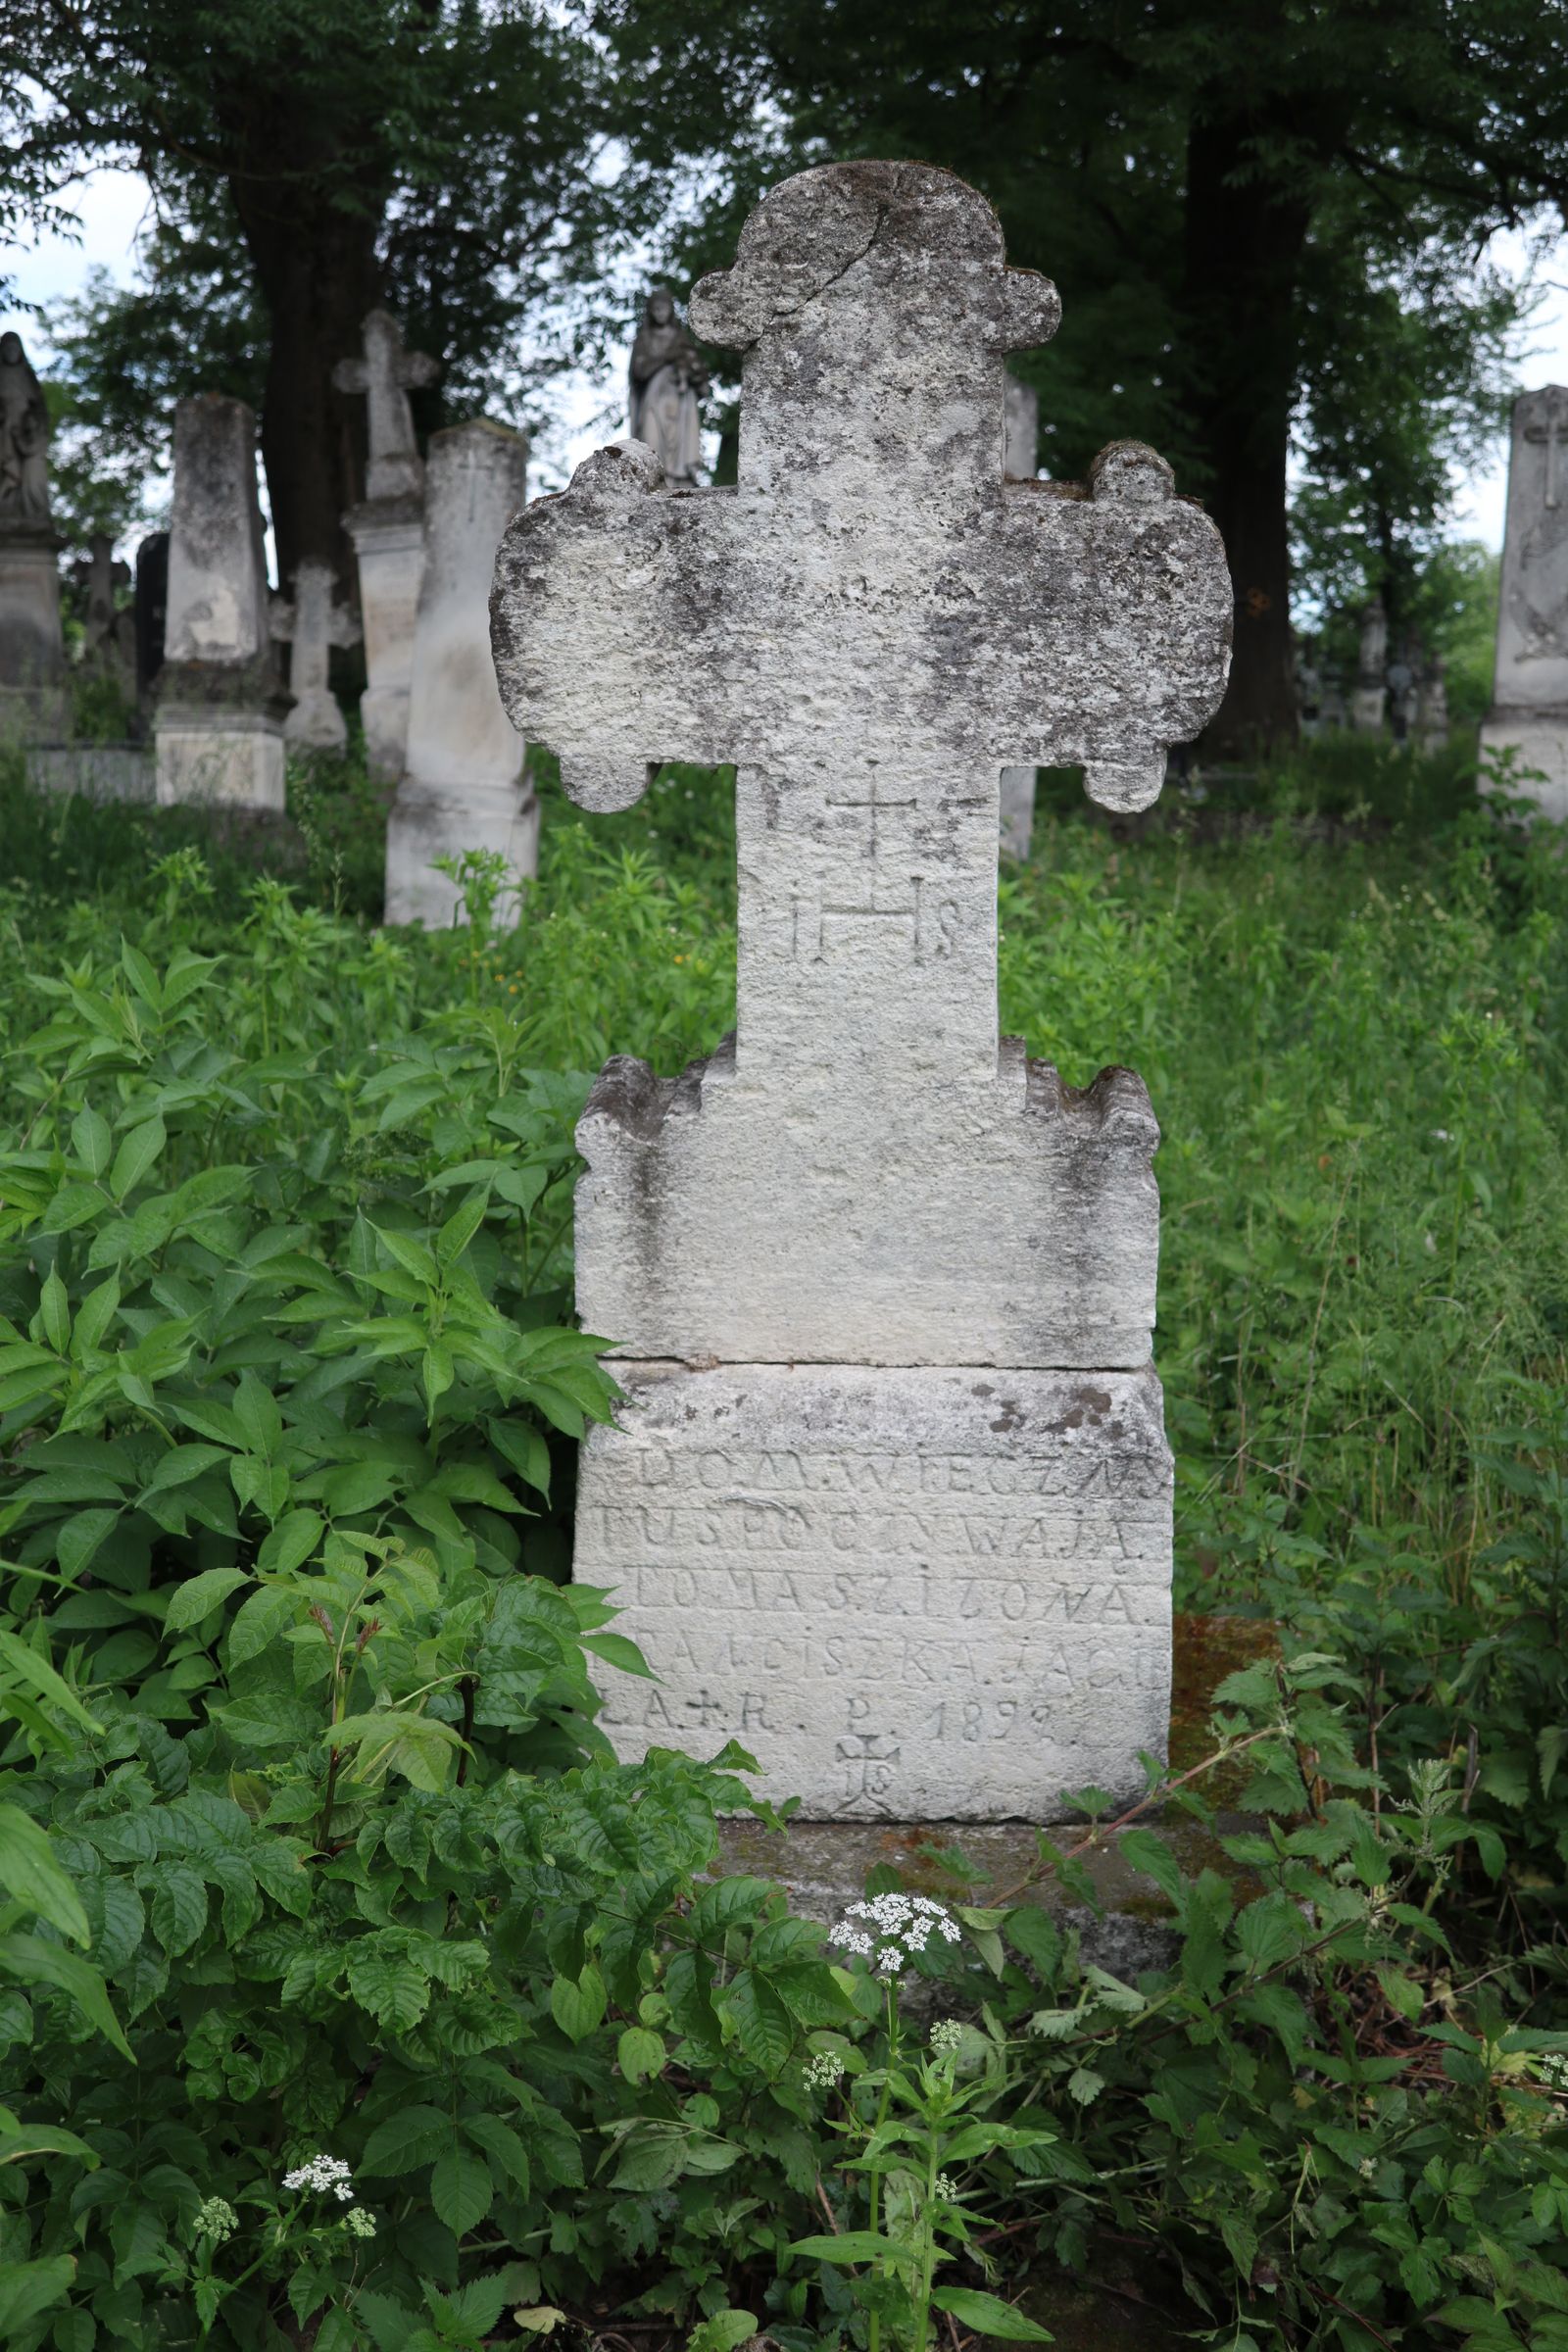 Tomas and Franciszka Jagiello's tombstone, Zbarazh cemetery, state of 2018